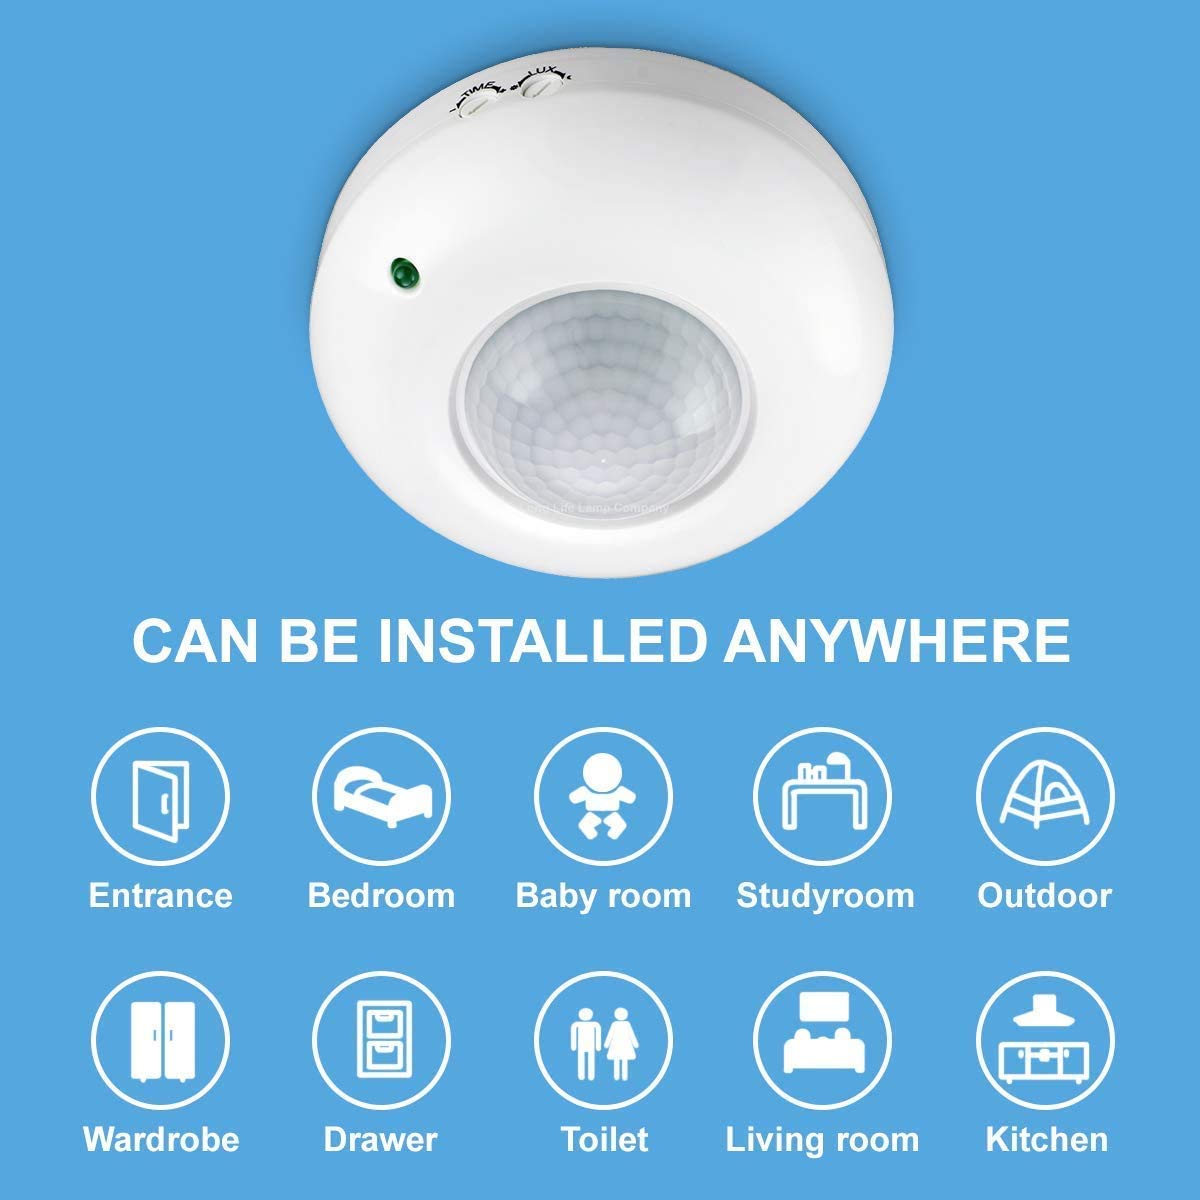 220VAC 360 Degree Ceiling Mounted PIR Motion Sensor With Adjustable Light Sensitivity and Time Delay